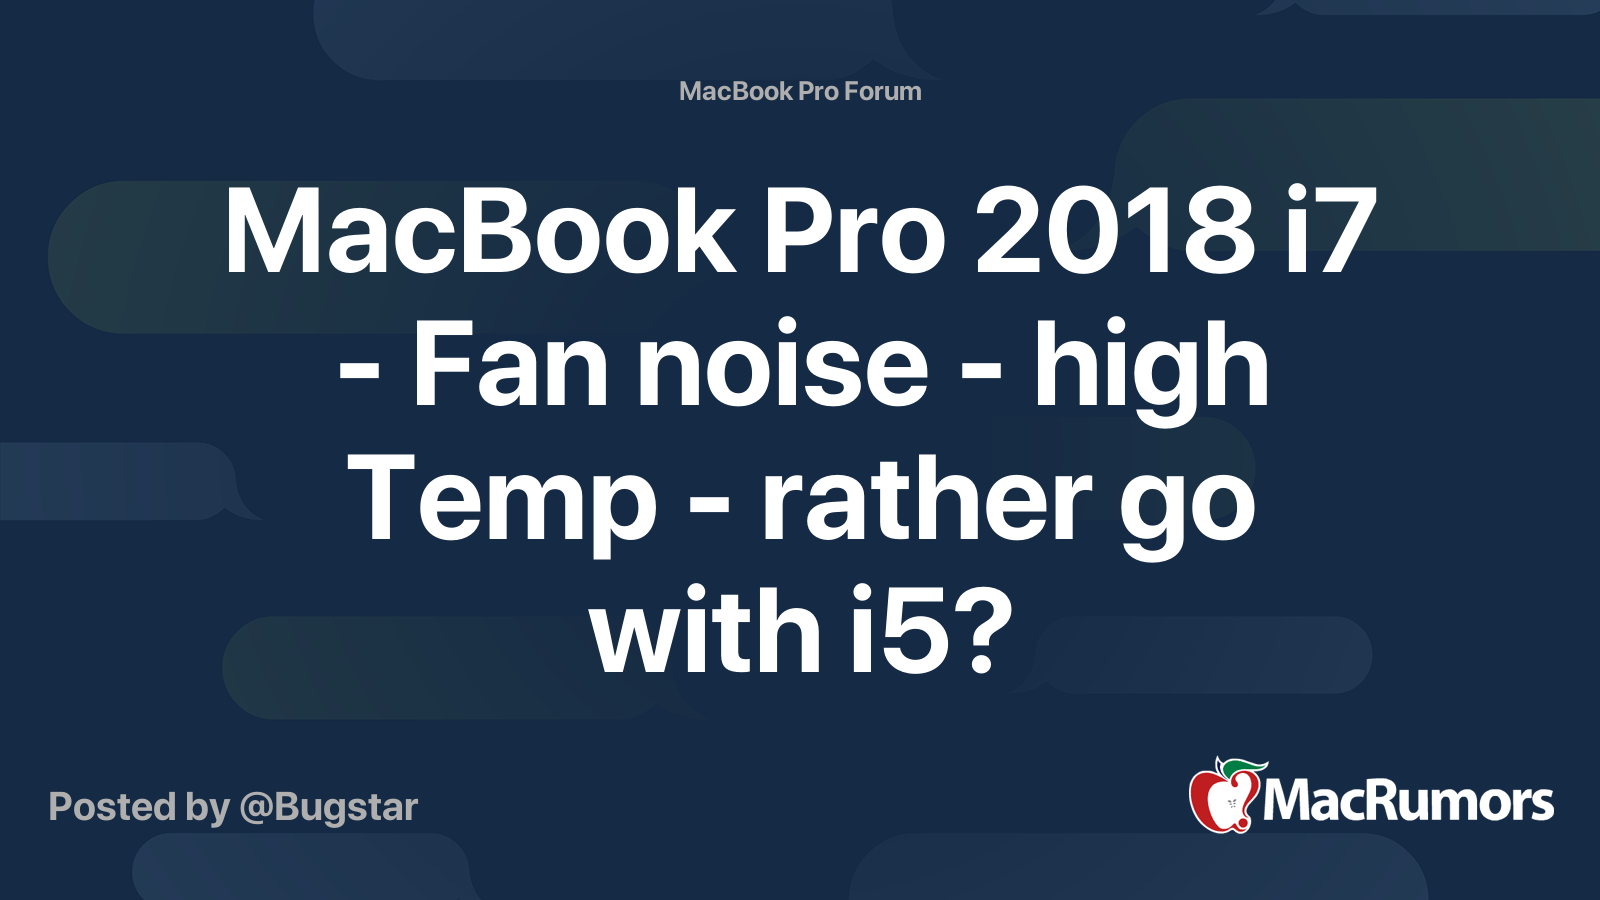 MacBook Pro 2018 - Fan noise - high Temp - rather go with i5? | Forums